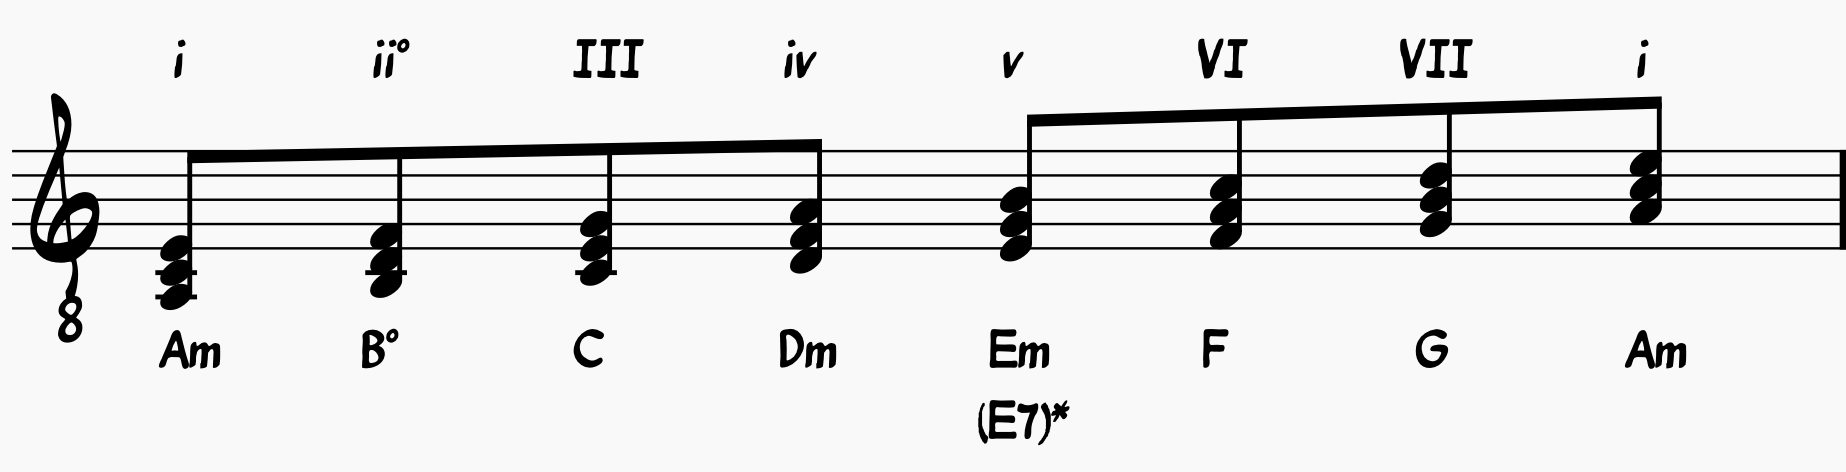 A minor scale with diatonic chords labeled with Roman numerals and chord names